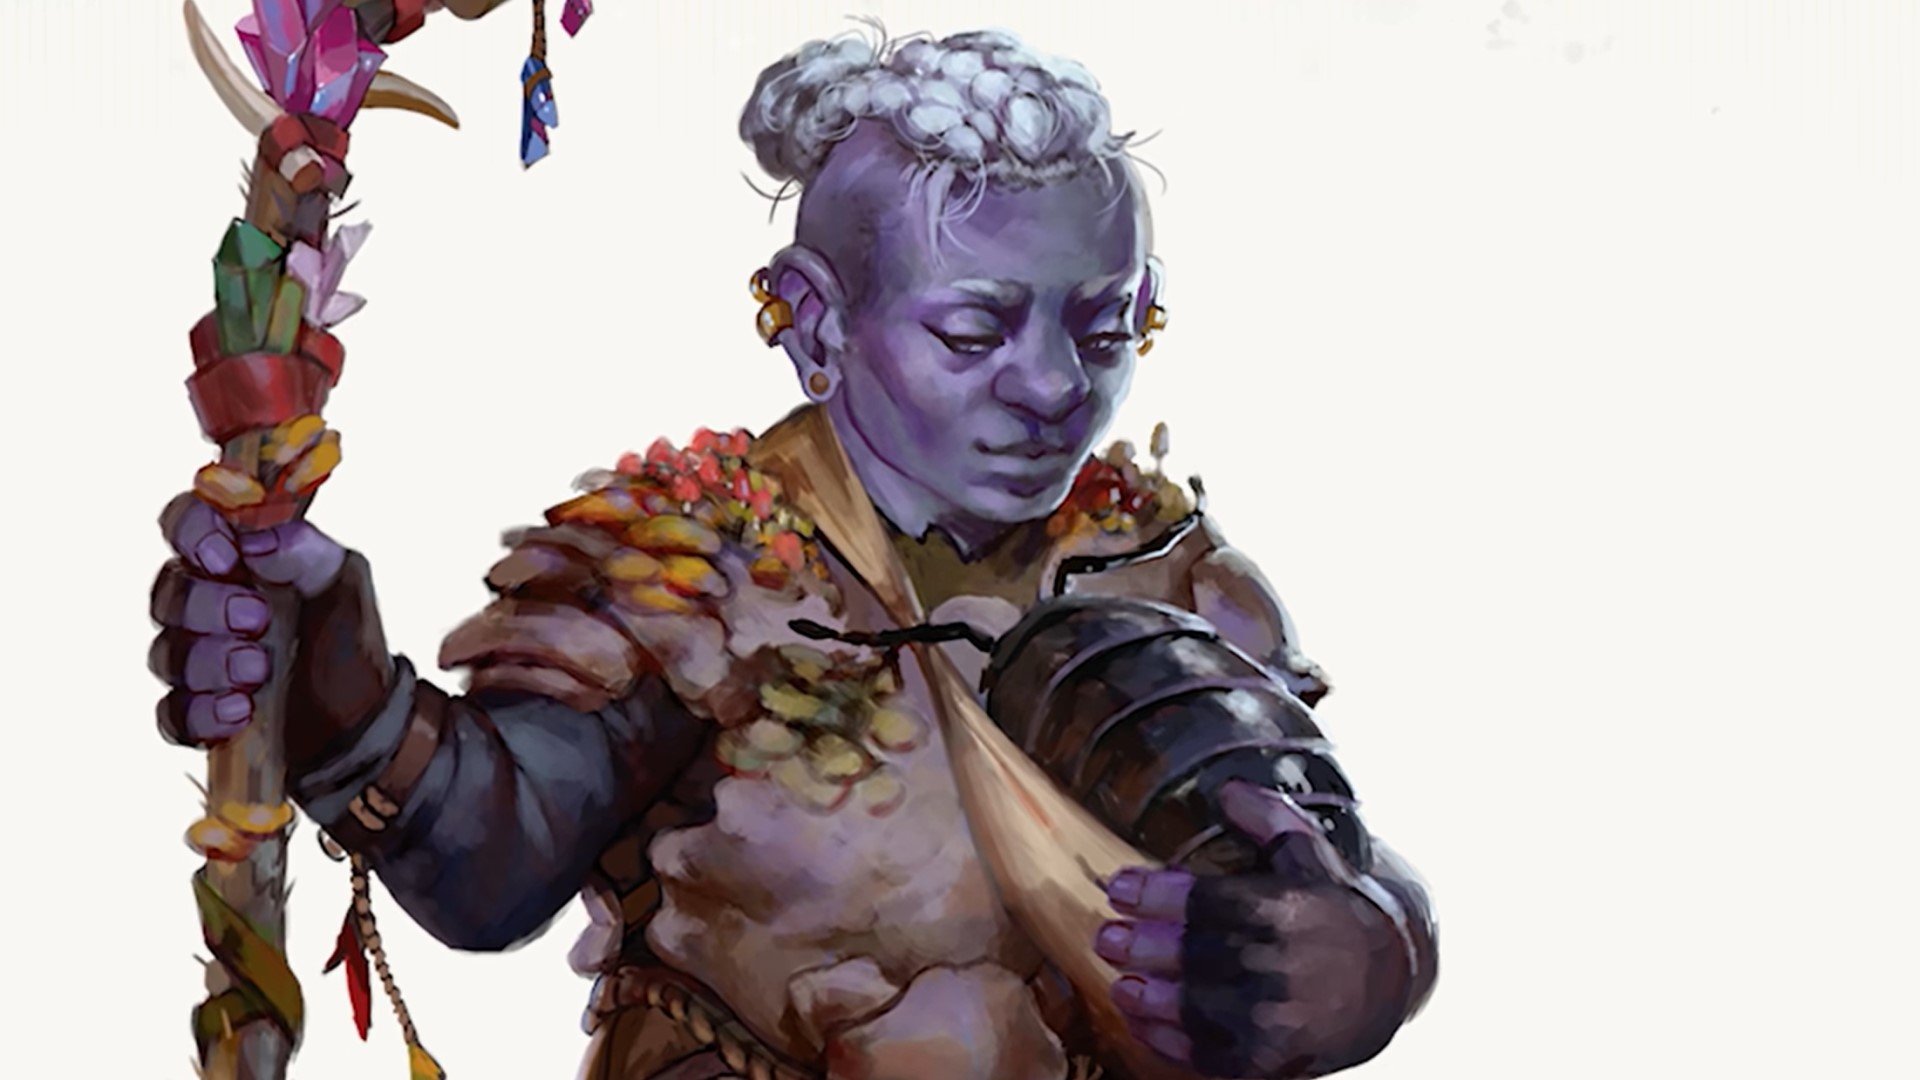 DnD Genasi 5e - Wizards of the Coast character with purple skin